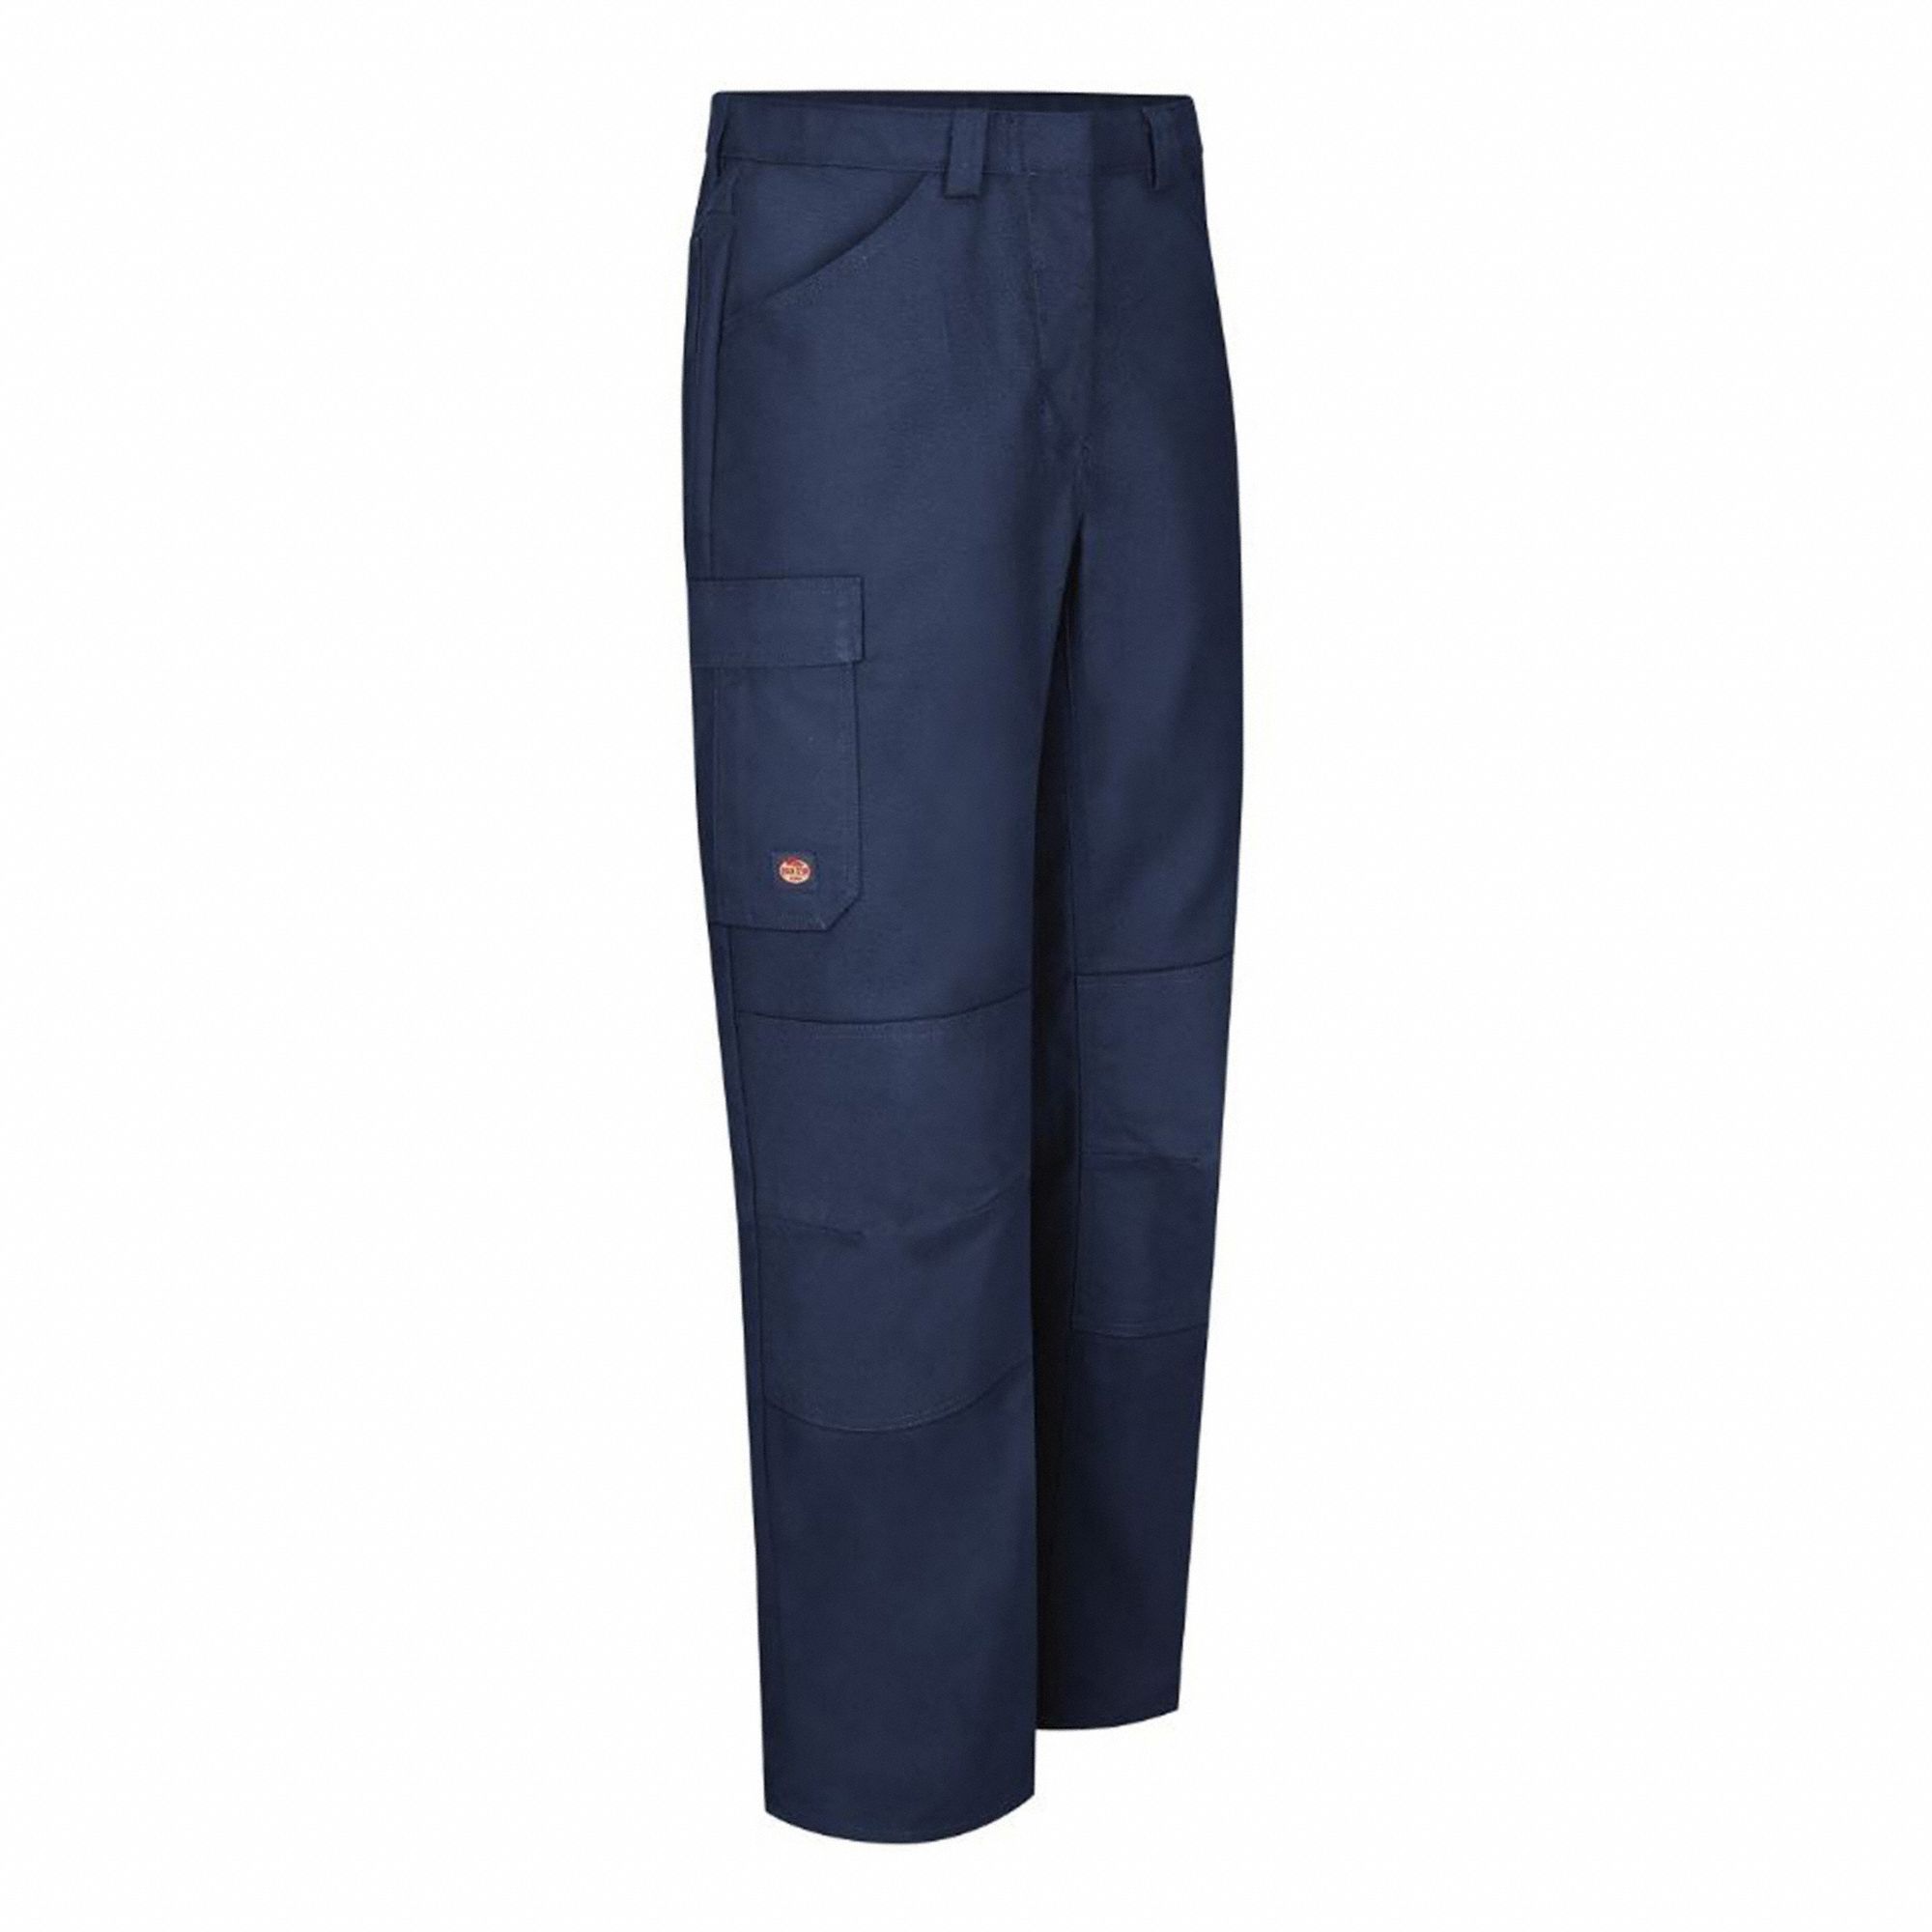 RED KAP MEN'S CARGO SHOP PANTS, NAVY, RELAXED FIT/STRETCH, ZIPPER, CANVAS, 38  X 34 IN, 8 OZ - Work Pants, Overalls & Shorts - VFIPT2ANV38W34I